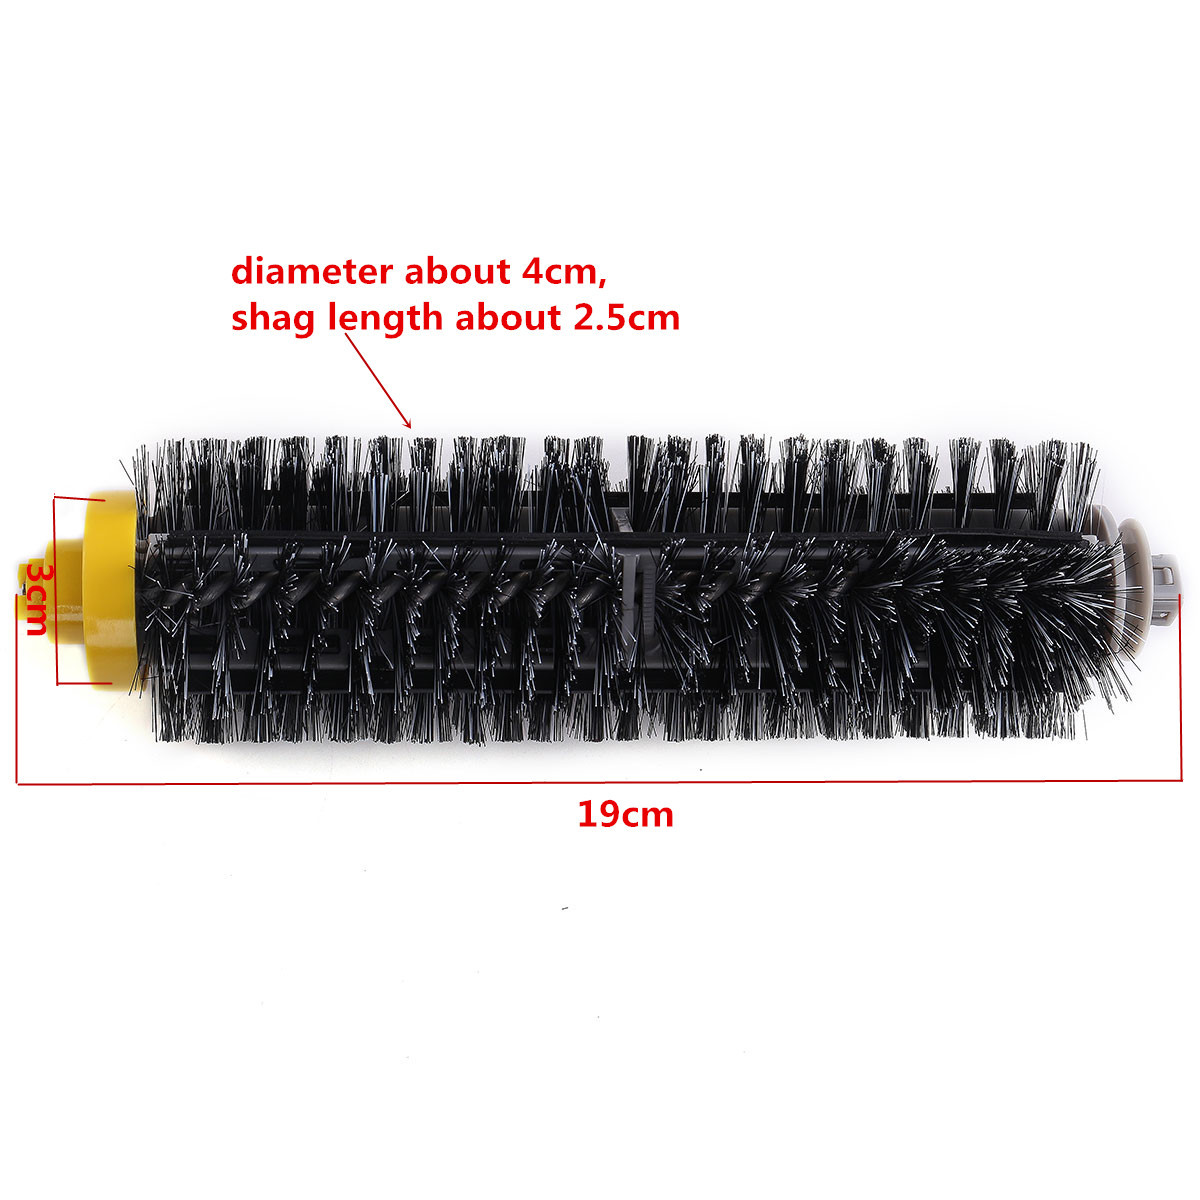 Accessory-Replacement-Kit-Brushes-Brushes-3-Armed-Aero-Vac-Filter-for-iRobot-600-Series-1338065-4